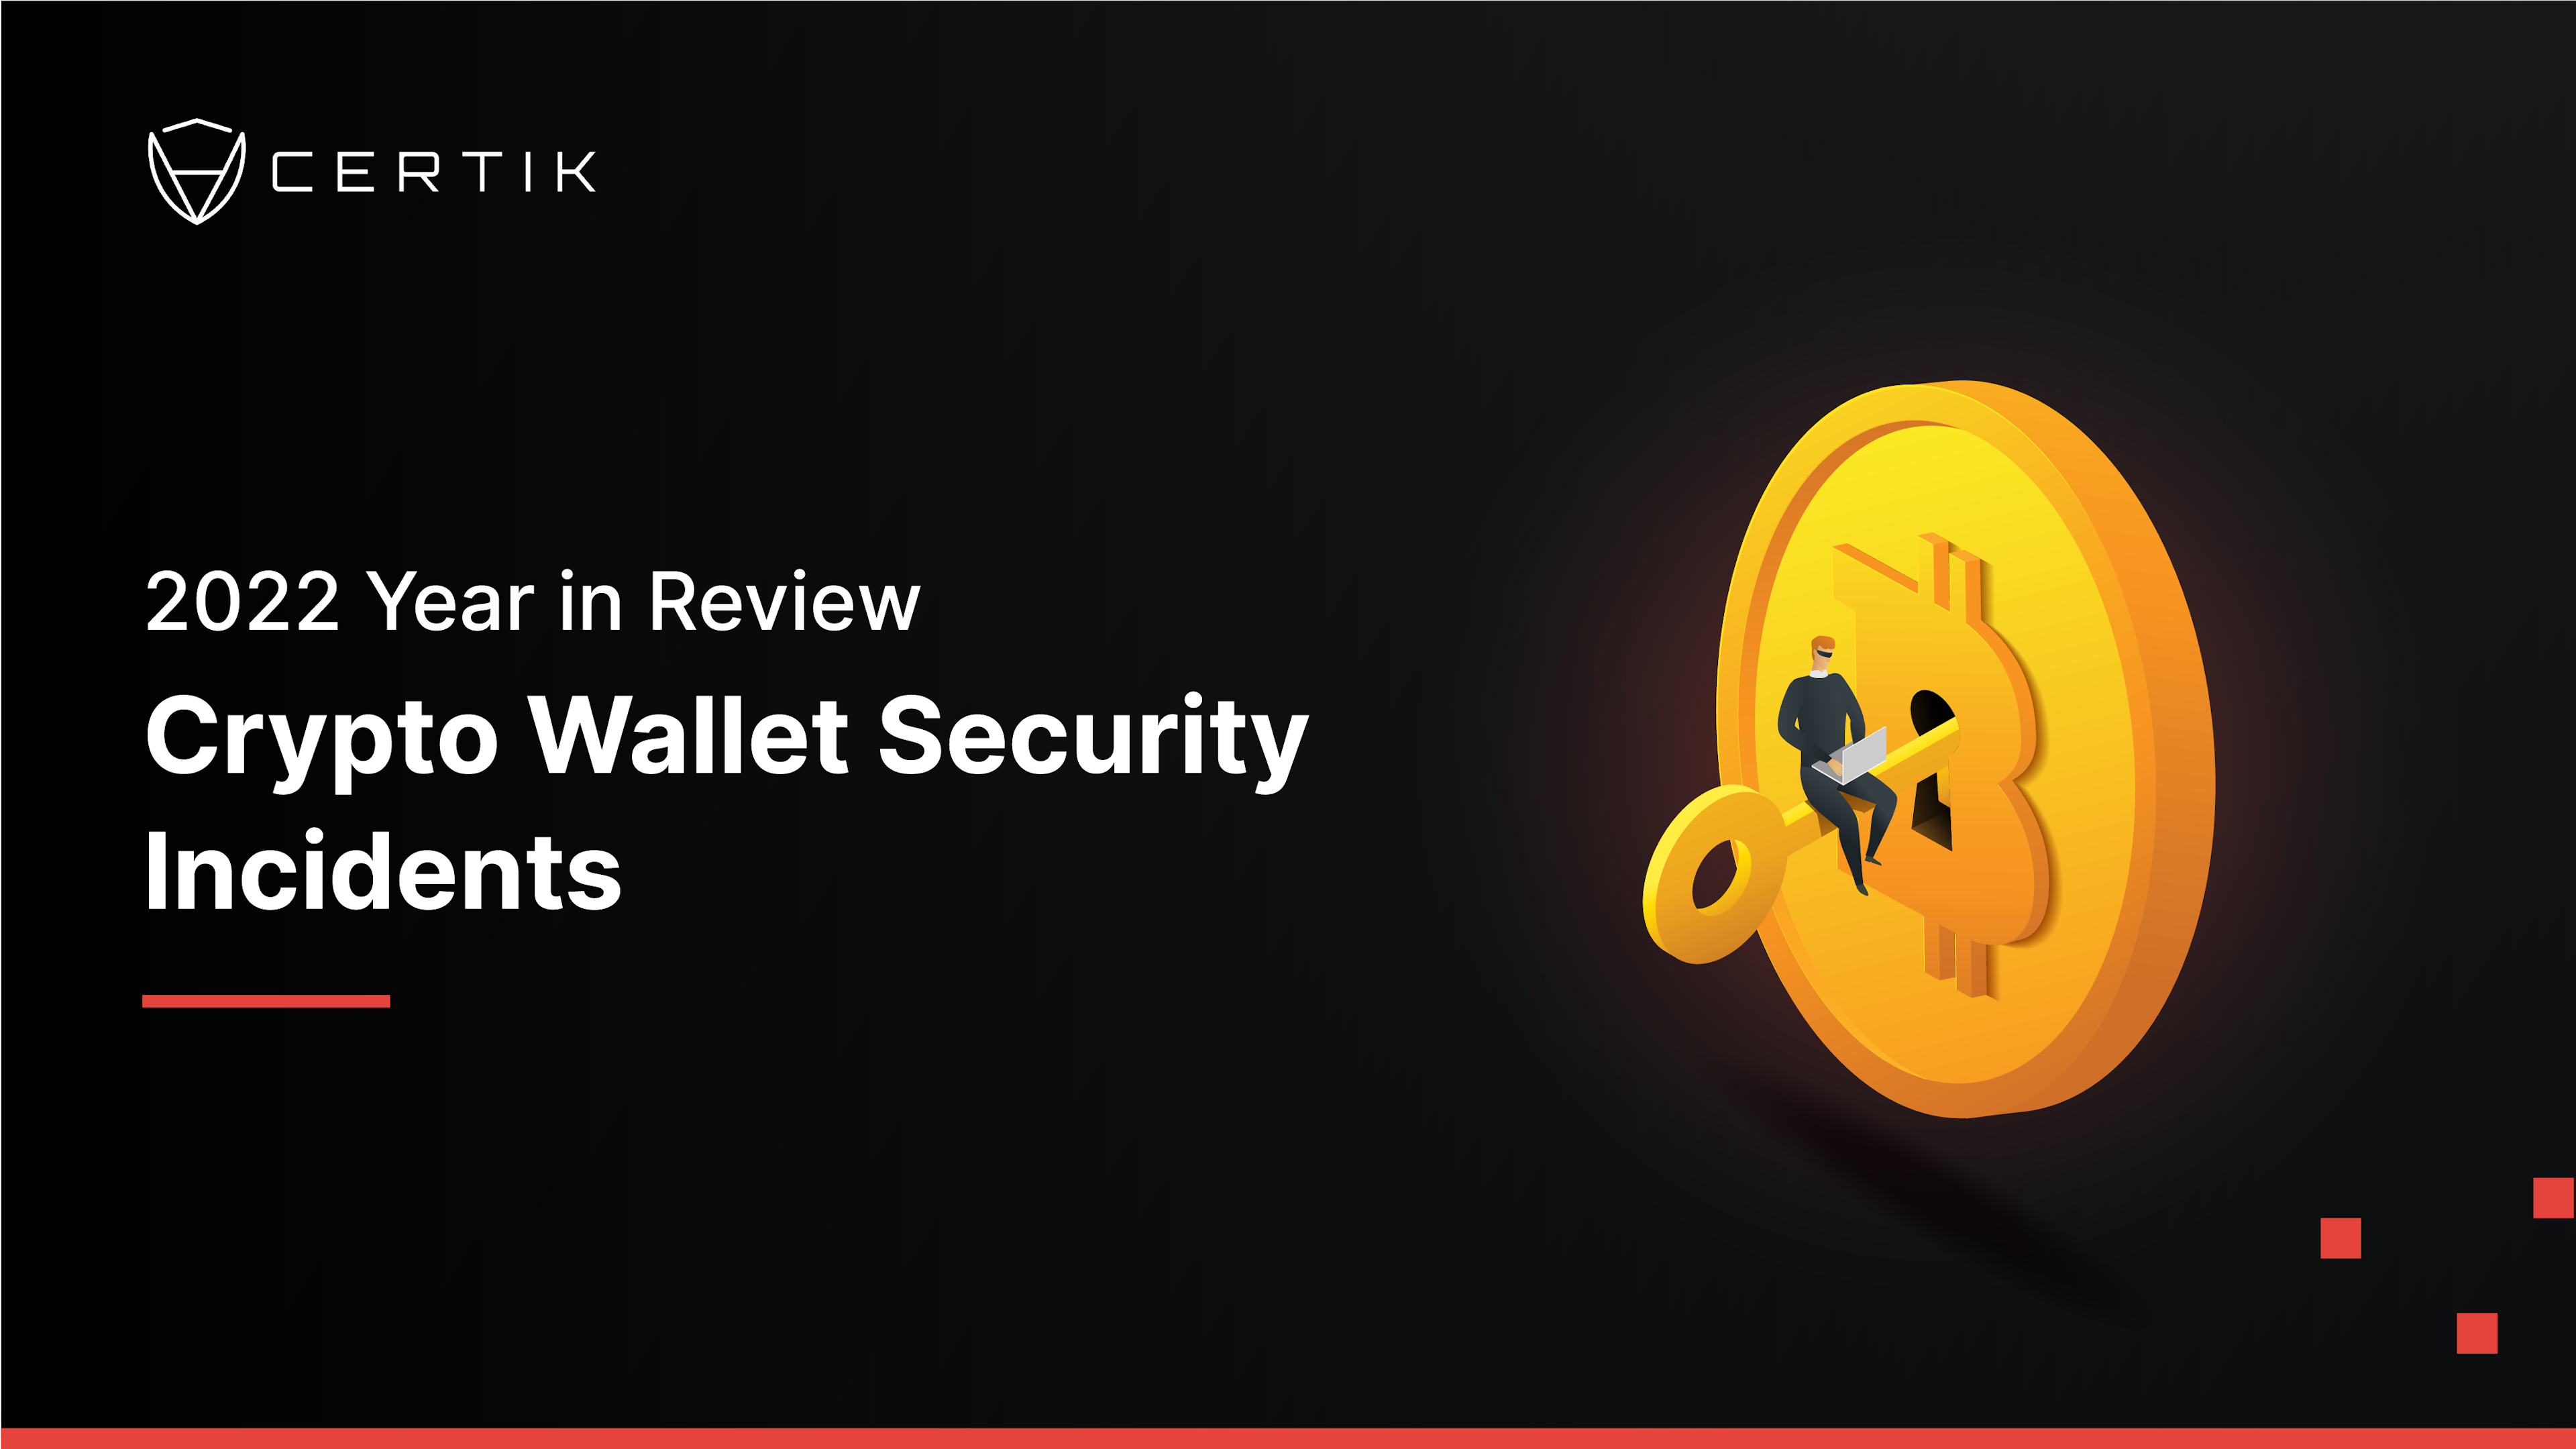 2022 Year in Review - Crypto Wallet Security Incidents